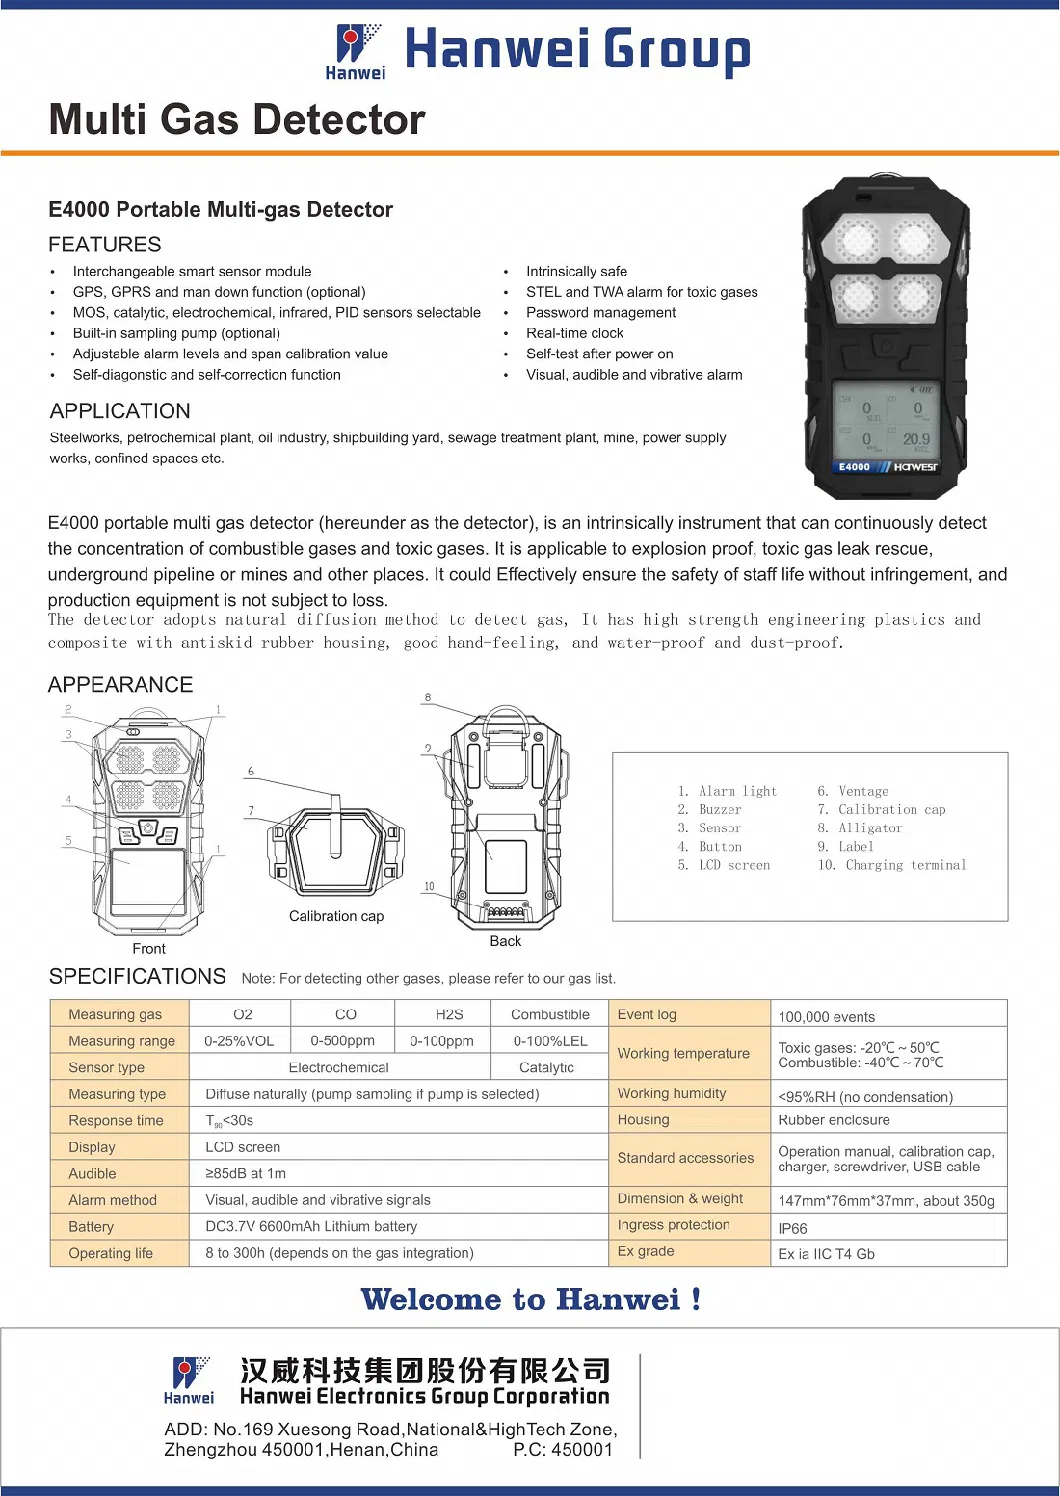 IP66 Portable Four-in-One Multi Gas Detector (E4000)